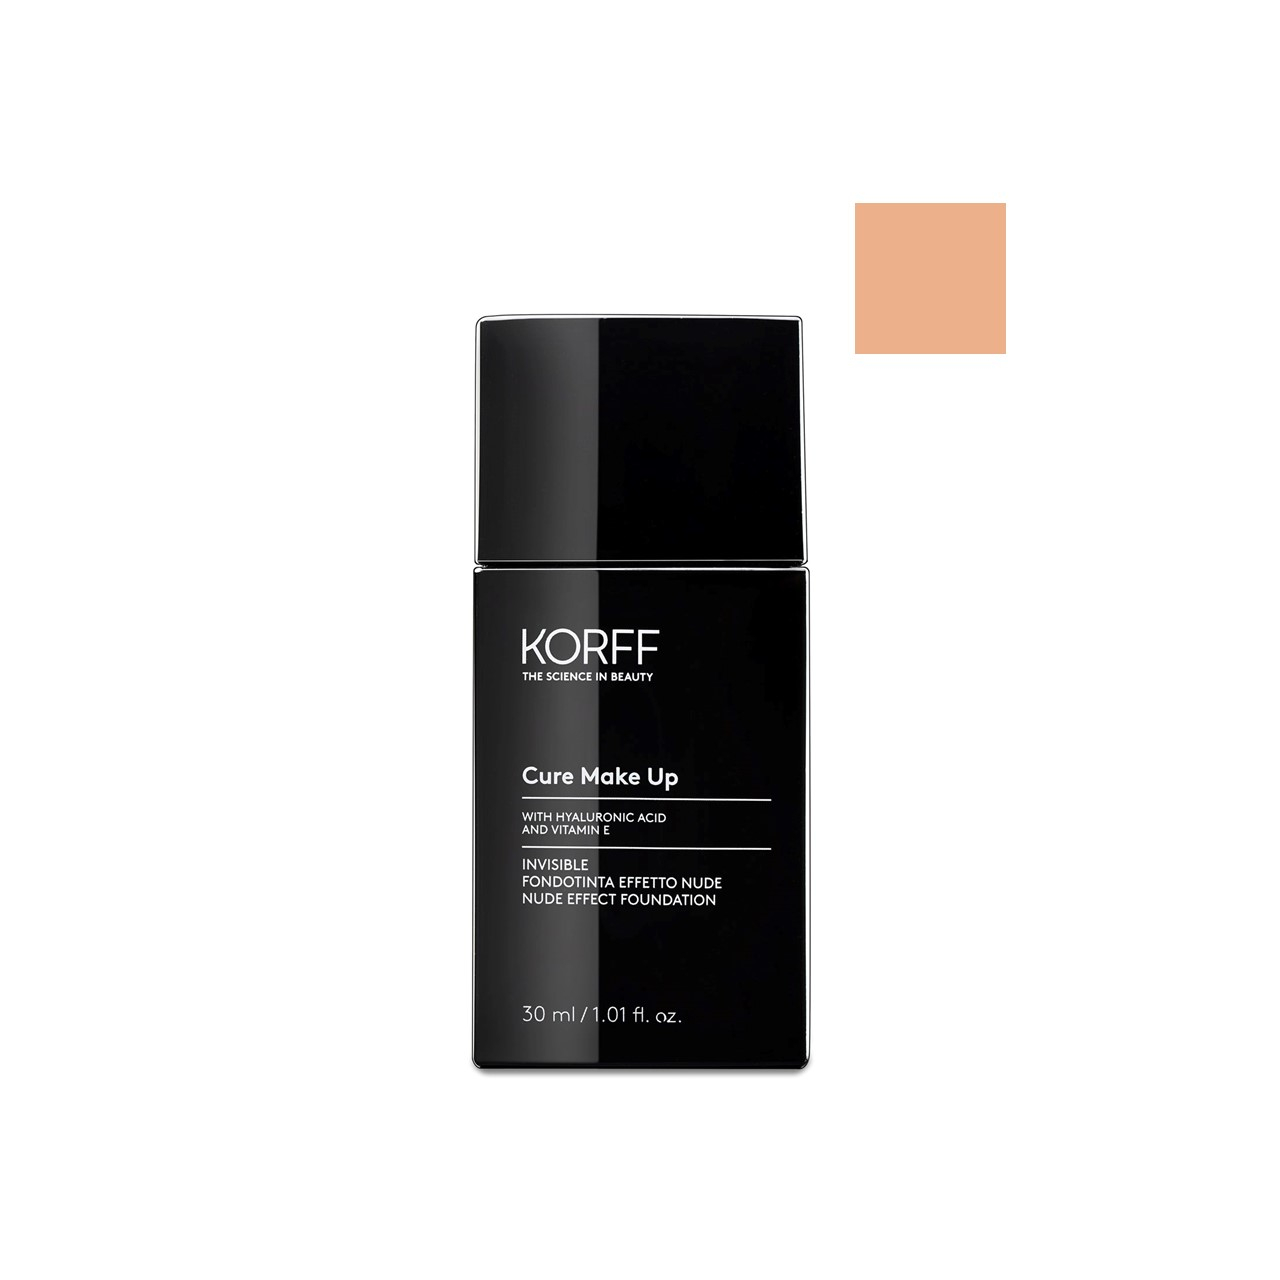 Korff Cure Make-Up Invisible Nude Effect Foundation 03 30ml (1.01 fl oz)